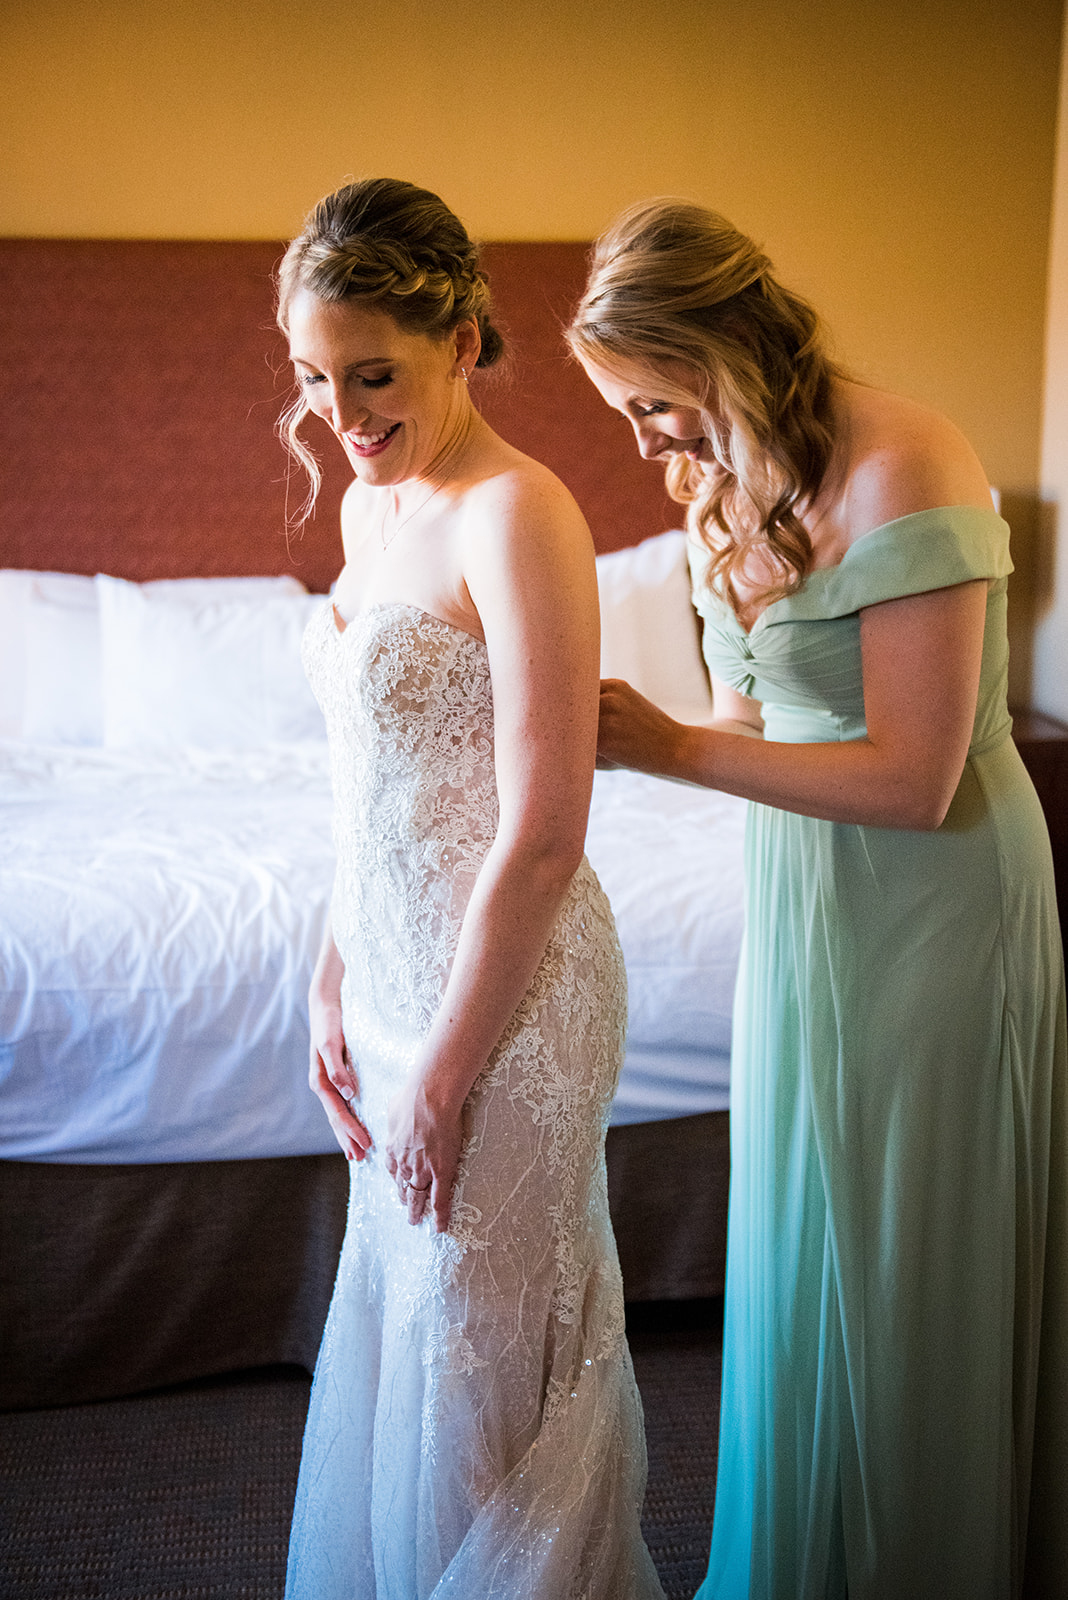 A bridesmaid helps the bride button the back of her dress as the two smile softy.